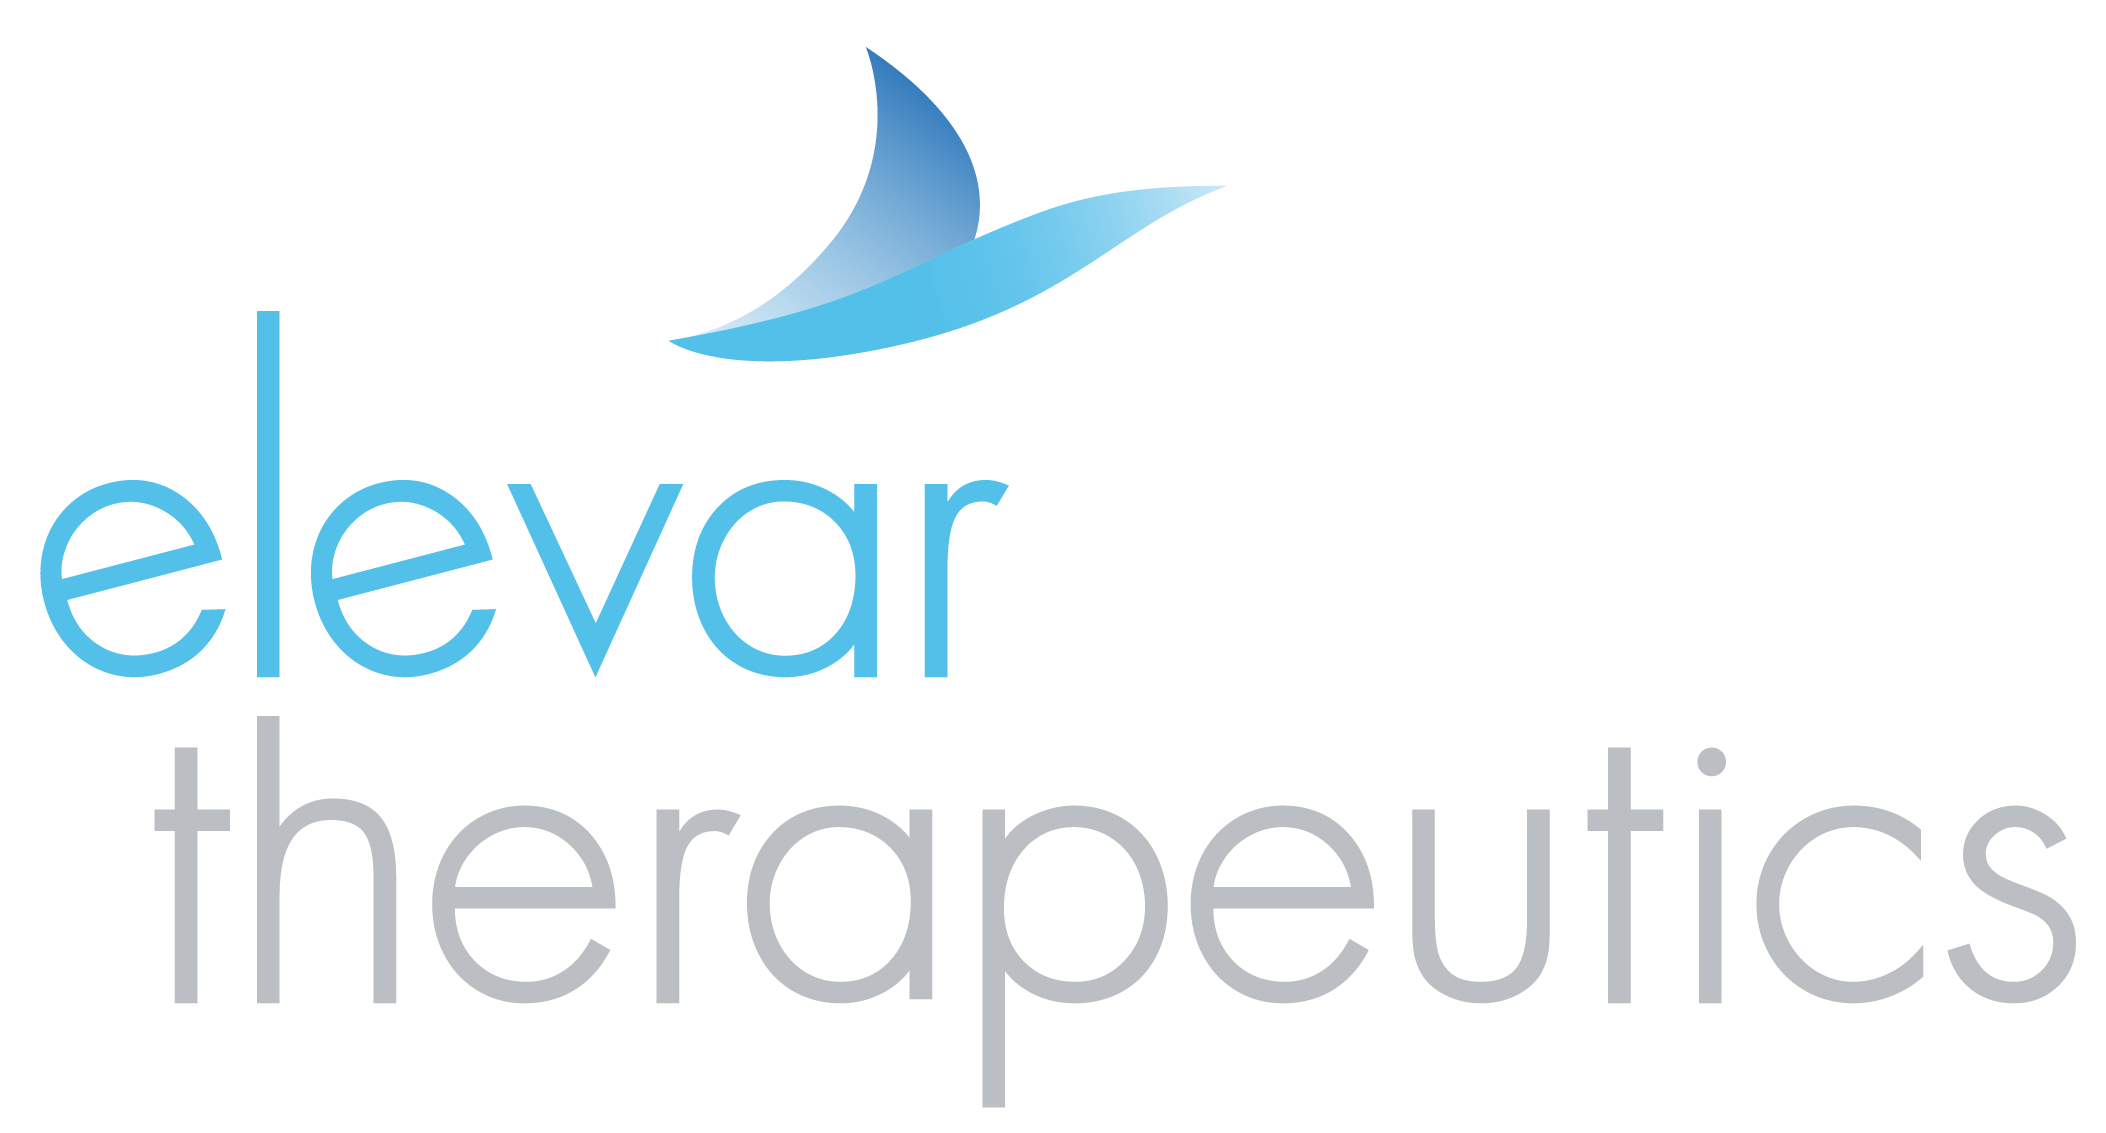 Elevar Therapeutics Announces Publication of Phase 3 CARES 310 Study Results in The Lancet